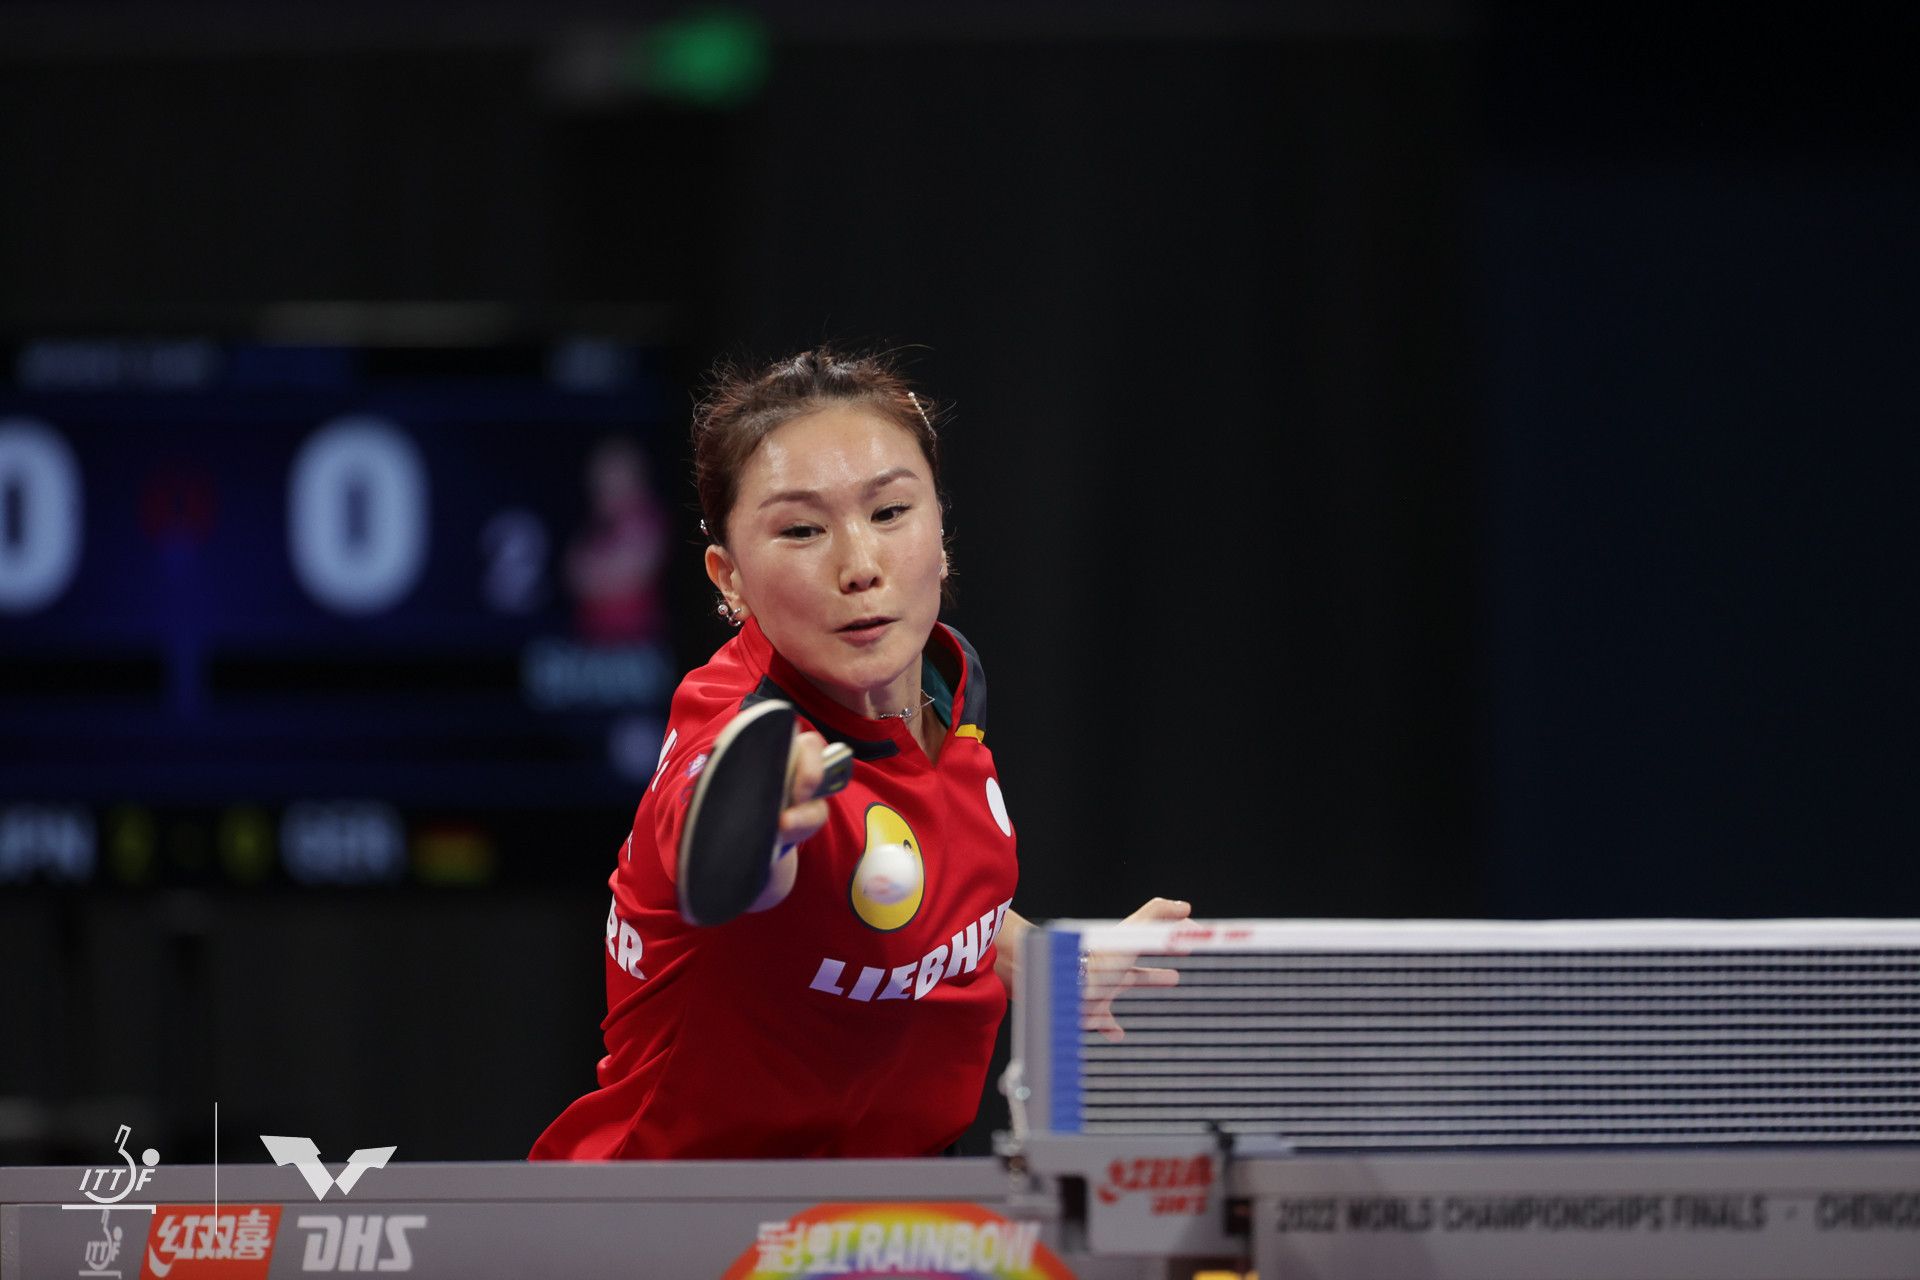 Defending champions China to face Japan in women's final at World Team Table Tennis Championships